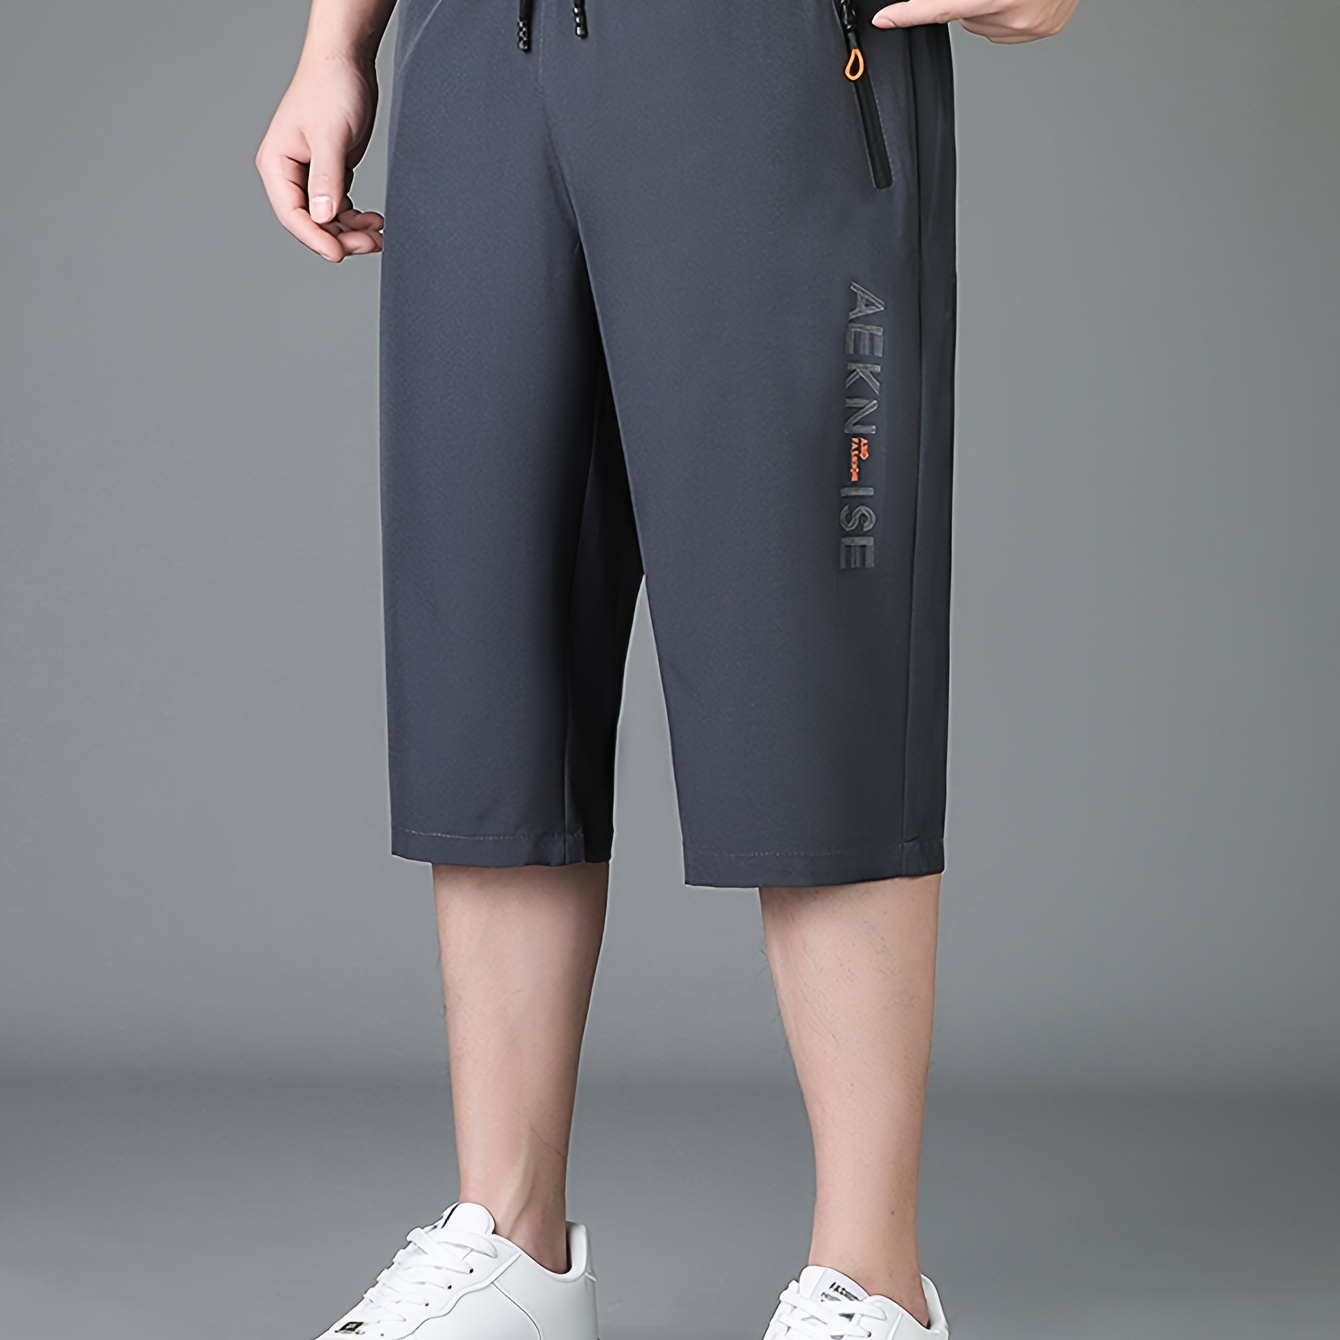 

Chic Design Men's Letter Print Capri Pants With Drawstring And Zippered Pockets, Quick Dry And Comfy Sports Shorts For Fitness Workout And Running Wear